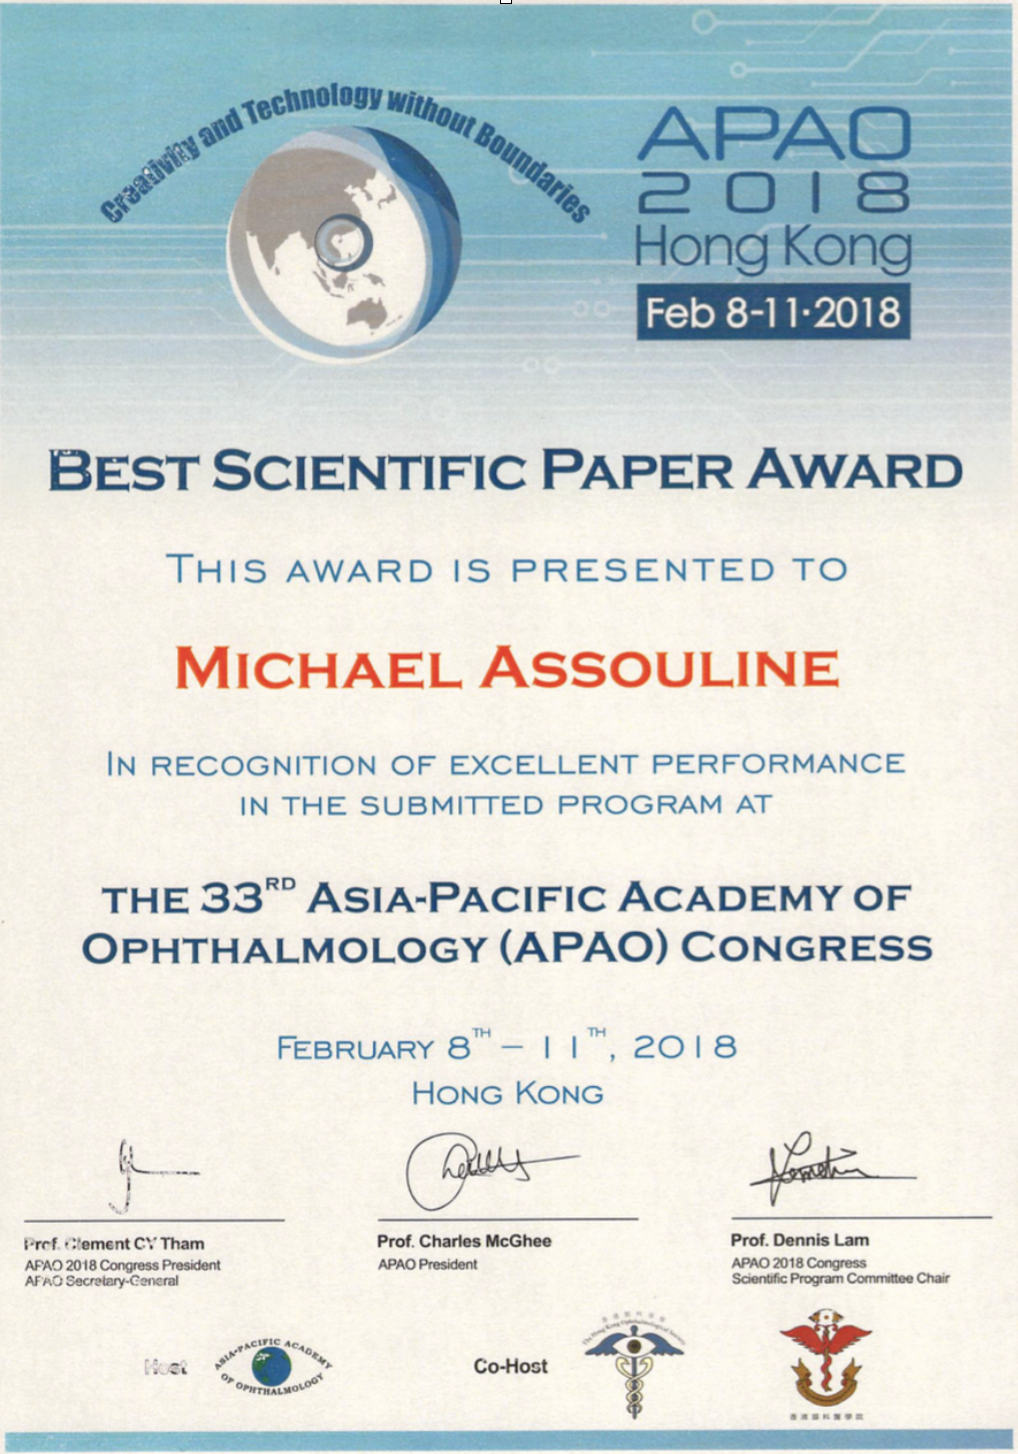 APAO 2018 Asia Pacific Academy of Ophtalmology